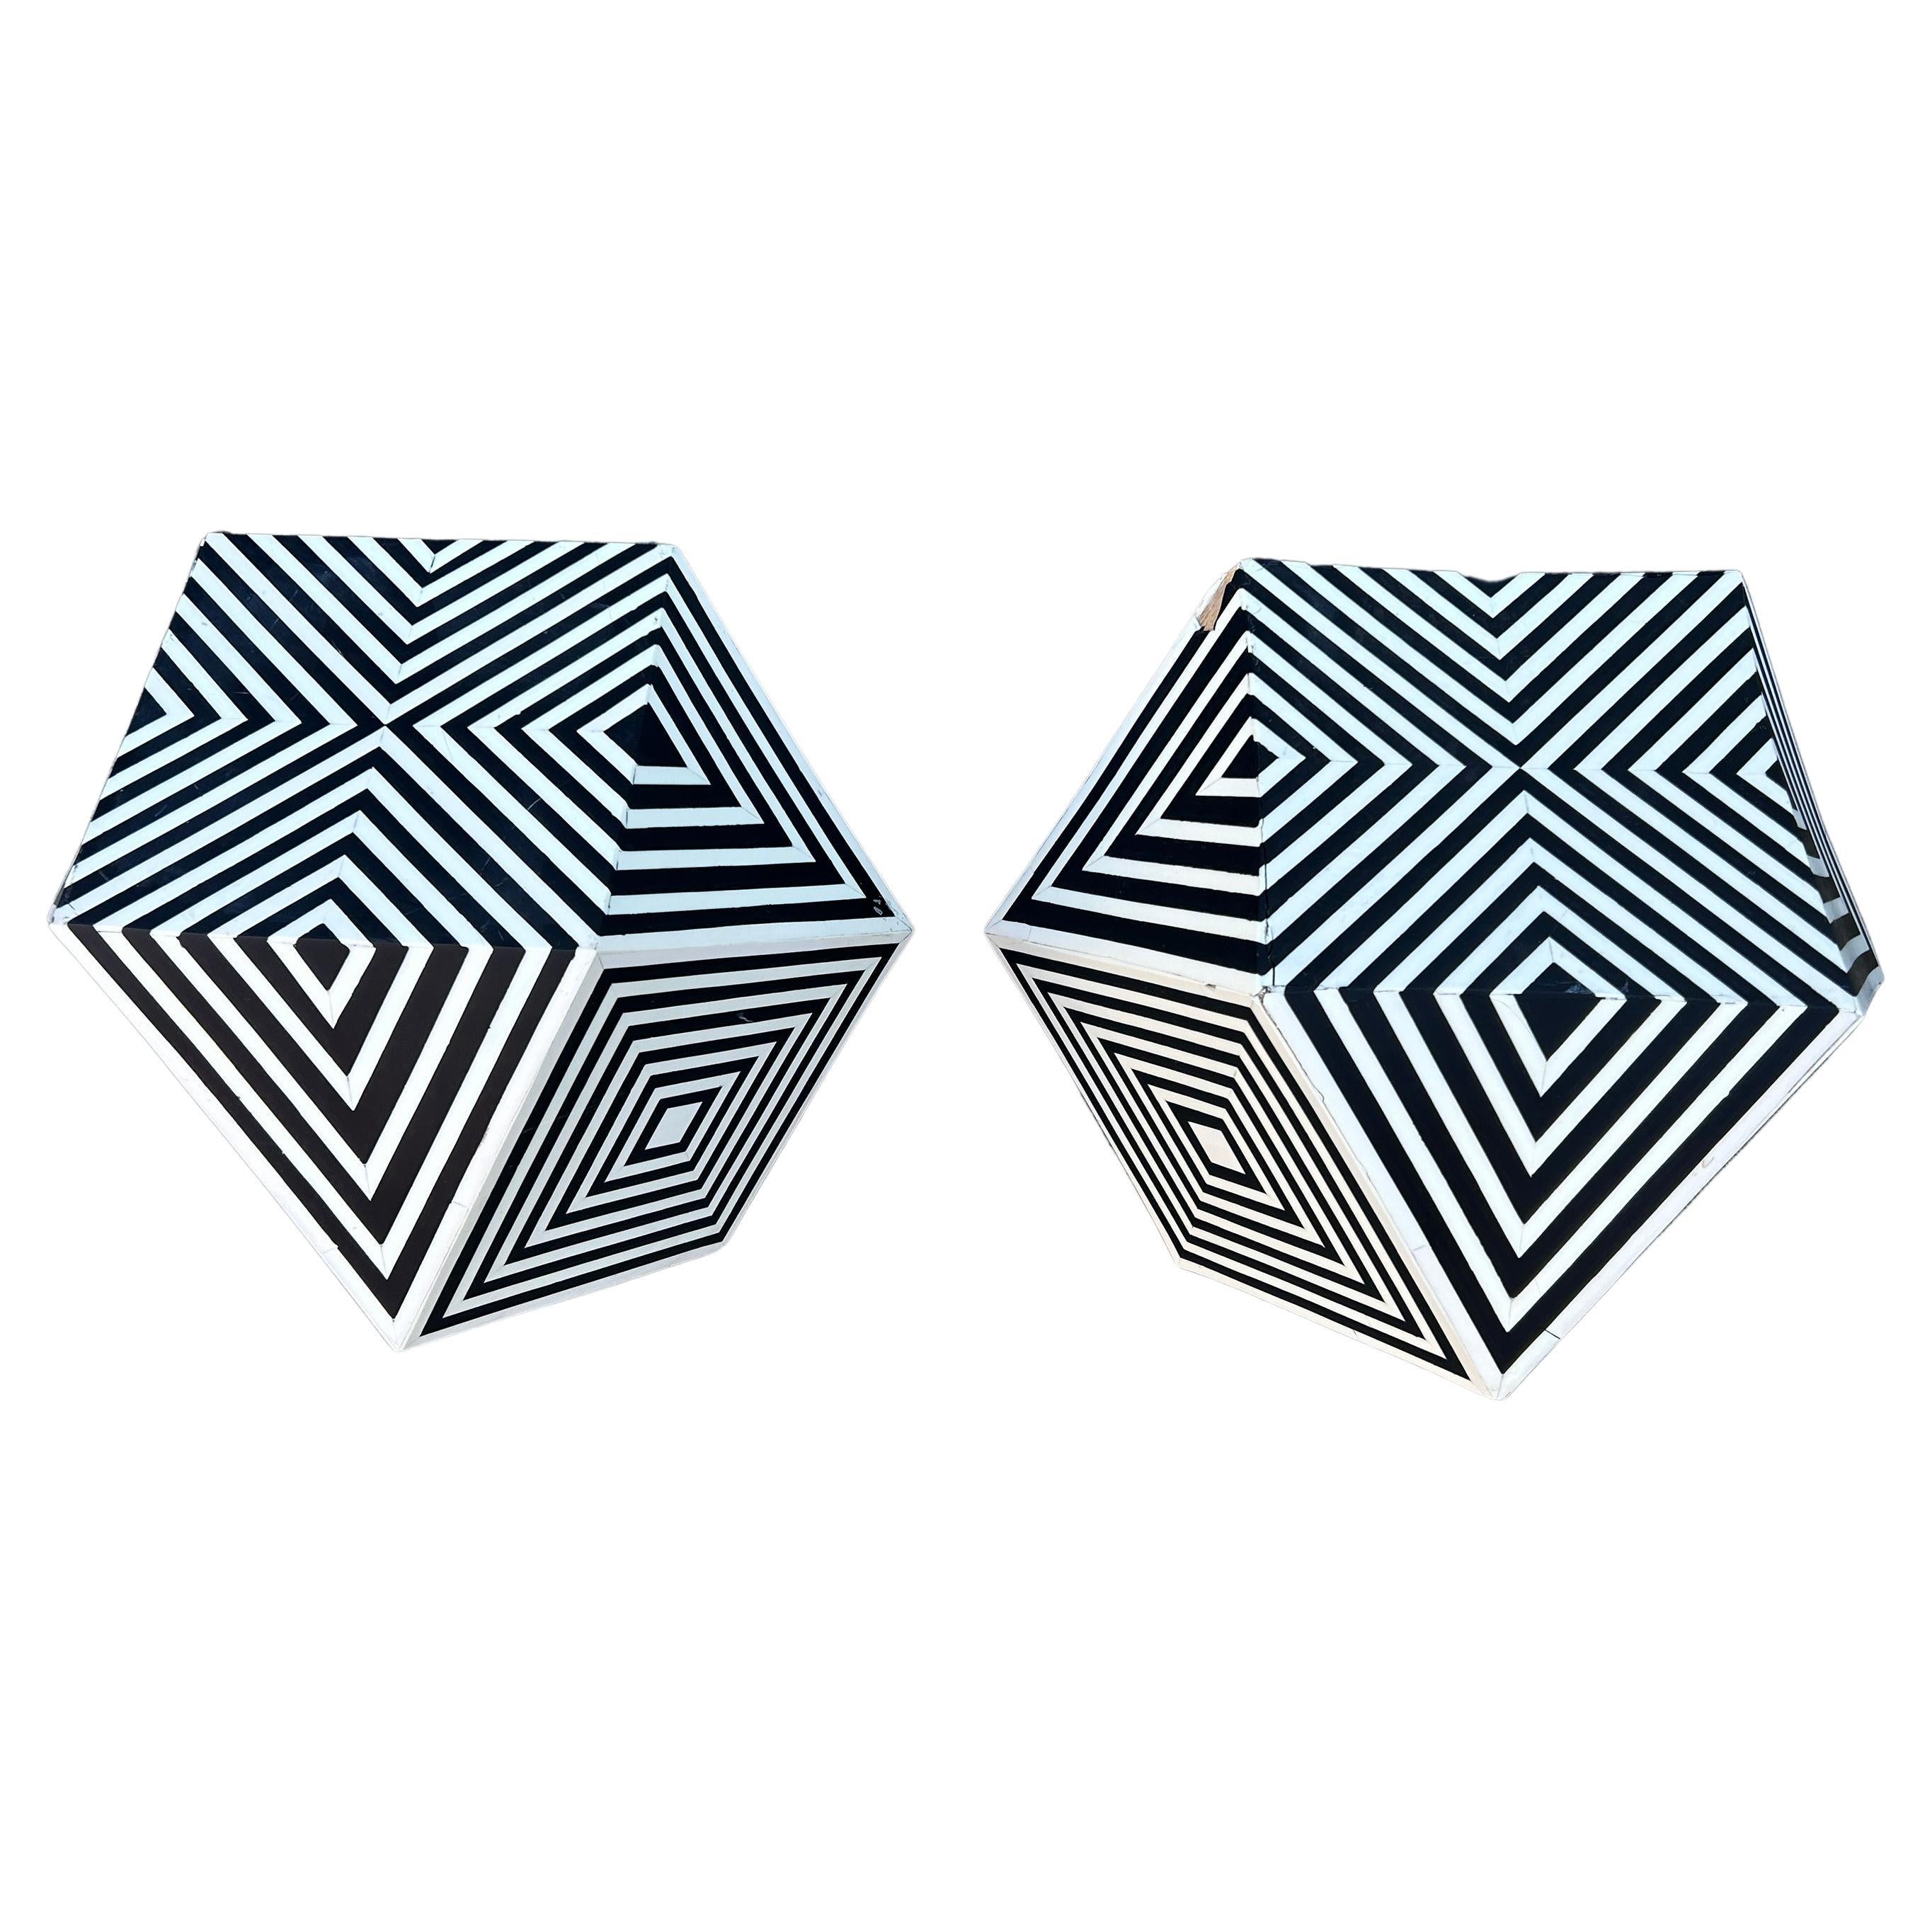 Awesome Pair of Geometric black and white resin stools or end tables art